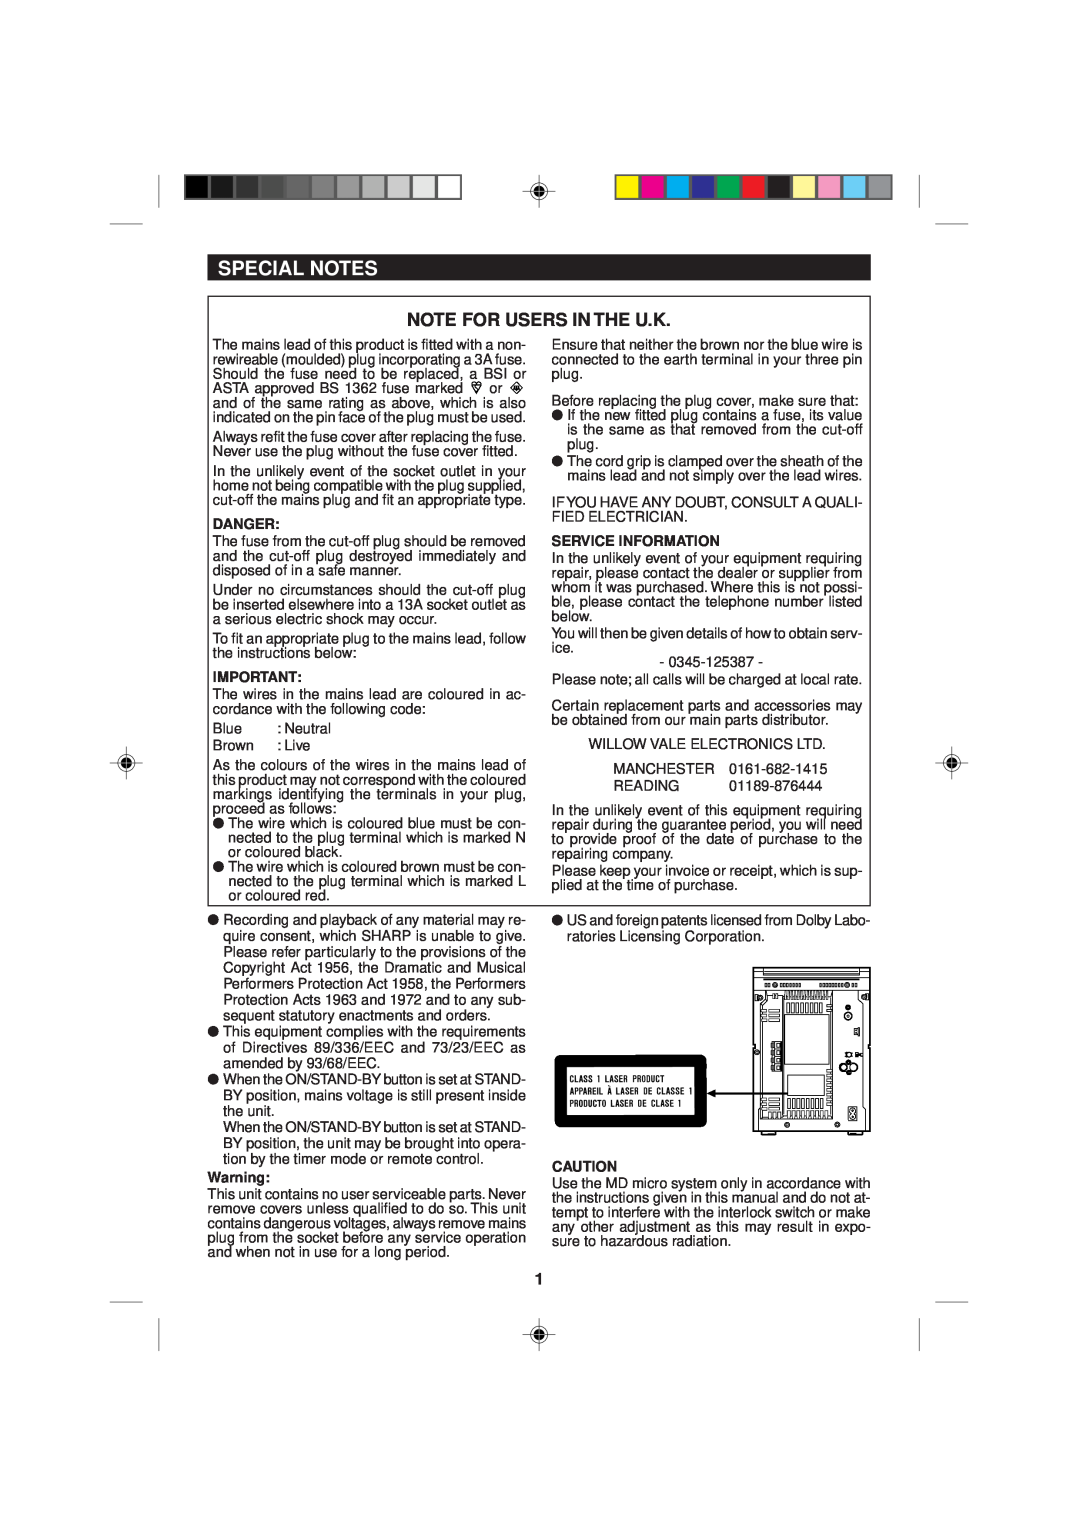 Sharp MD-M1H operation manual Special Notes, Note For Users In The U.K 